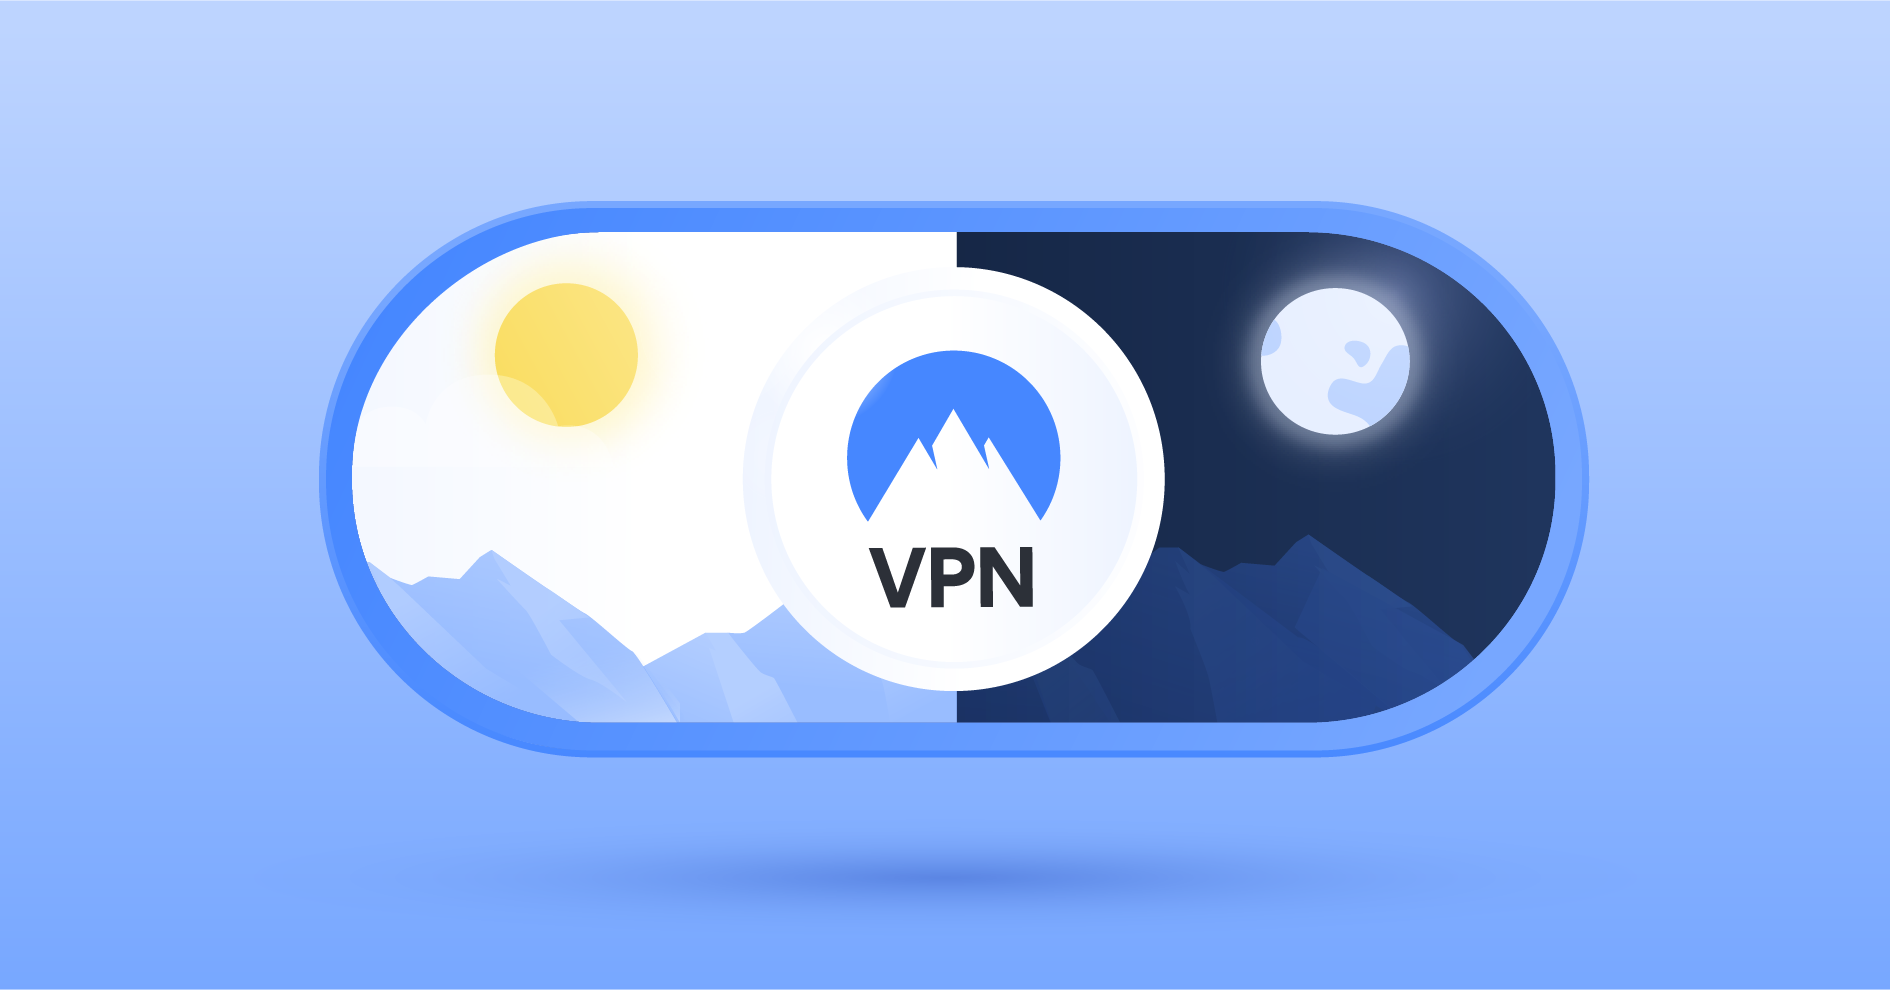 How private is a VPN?